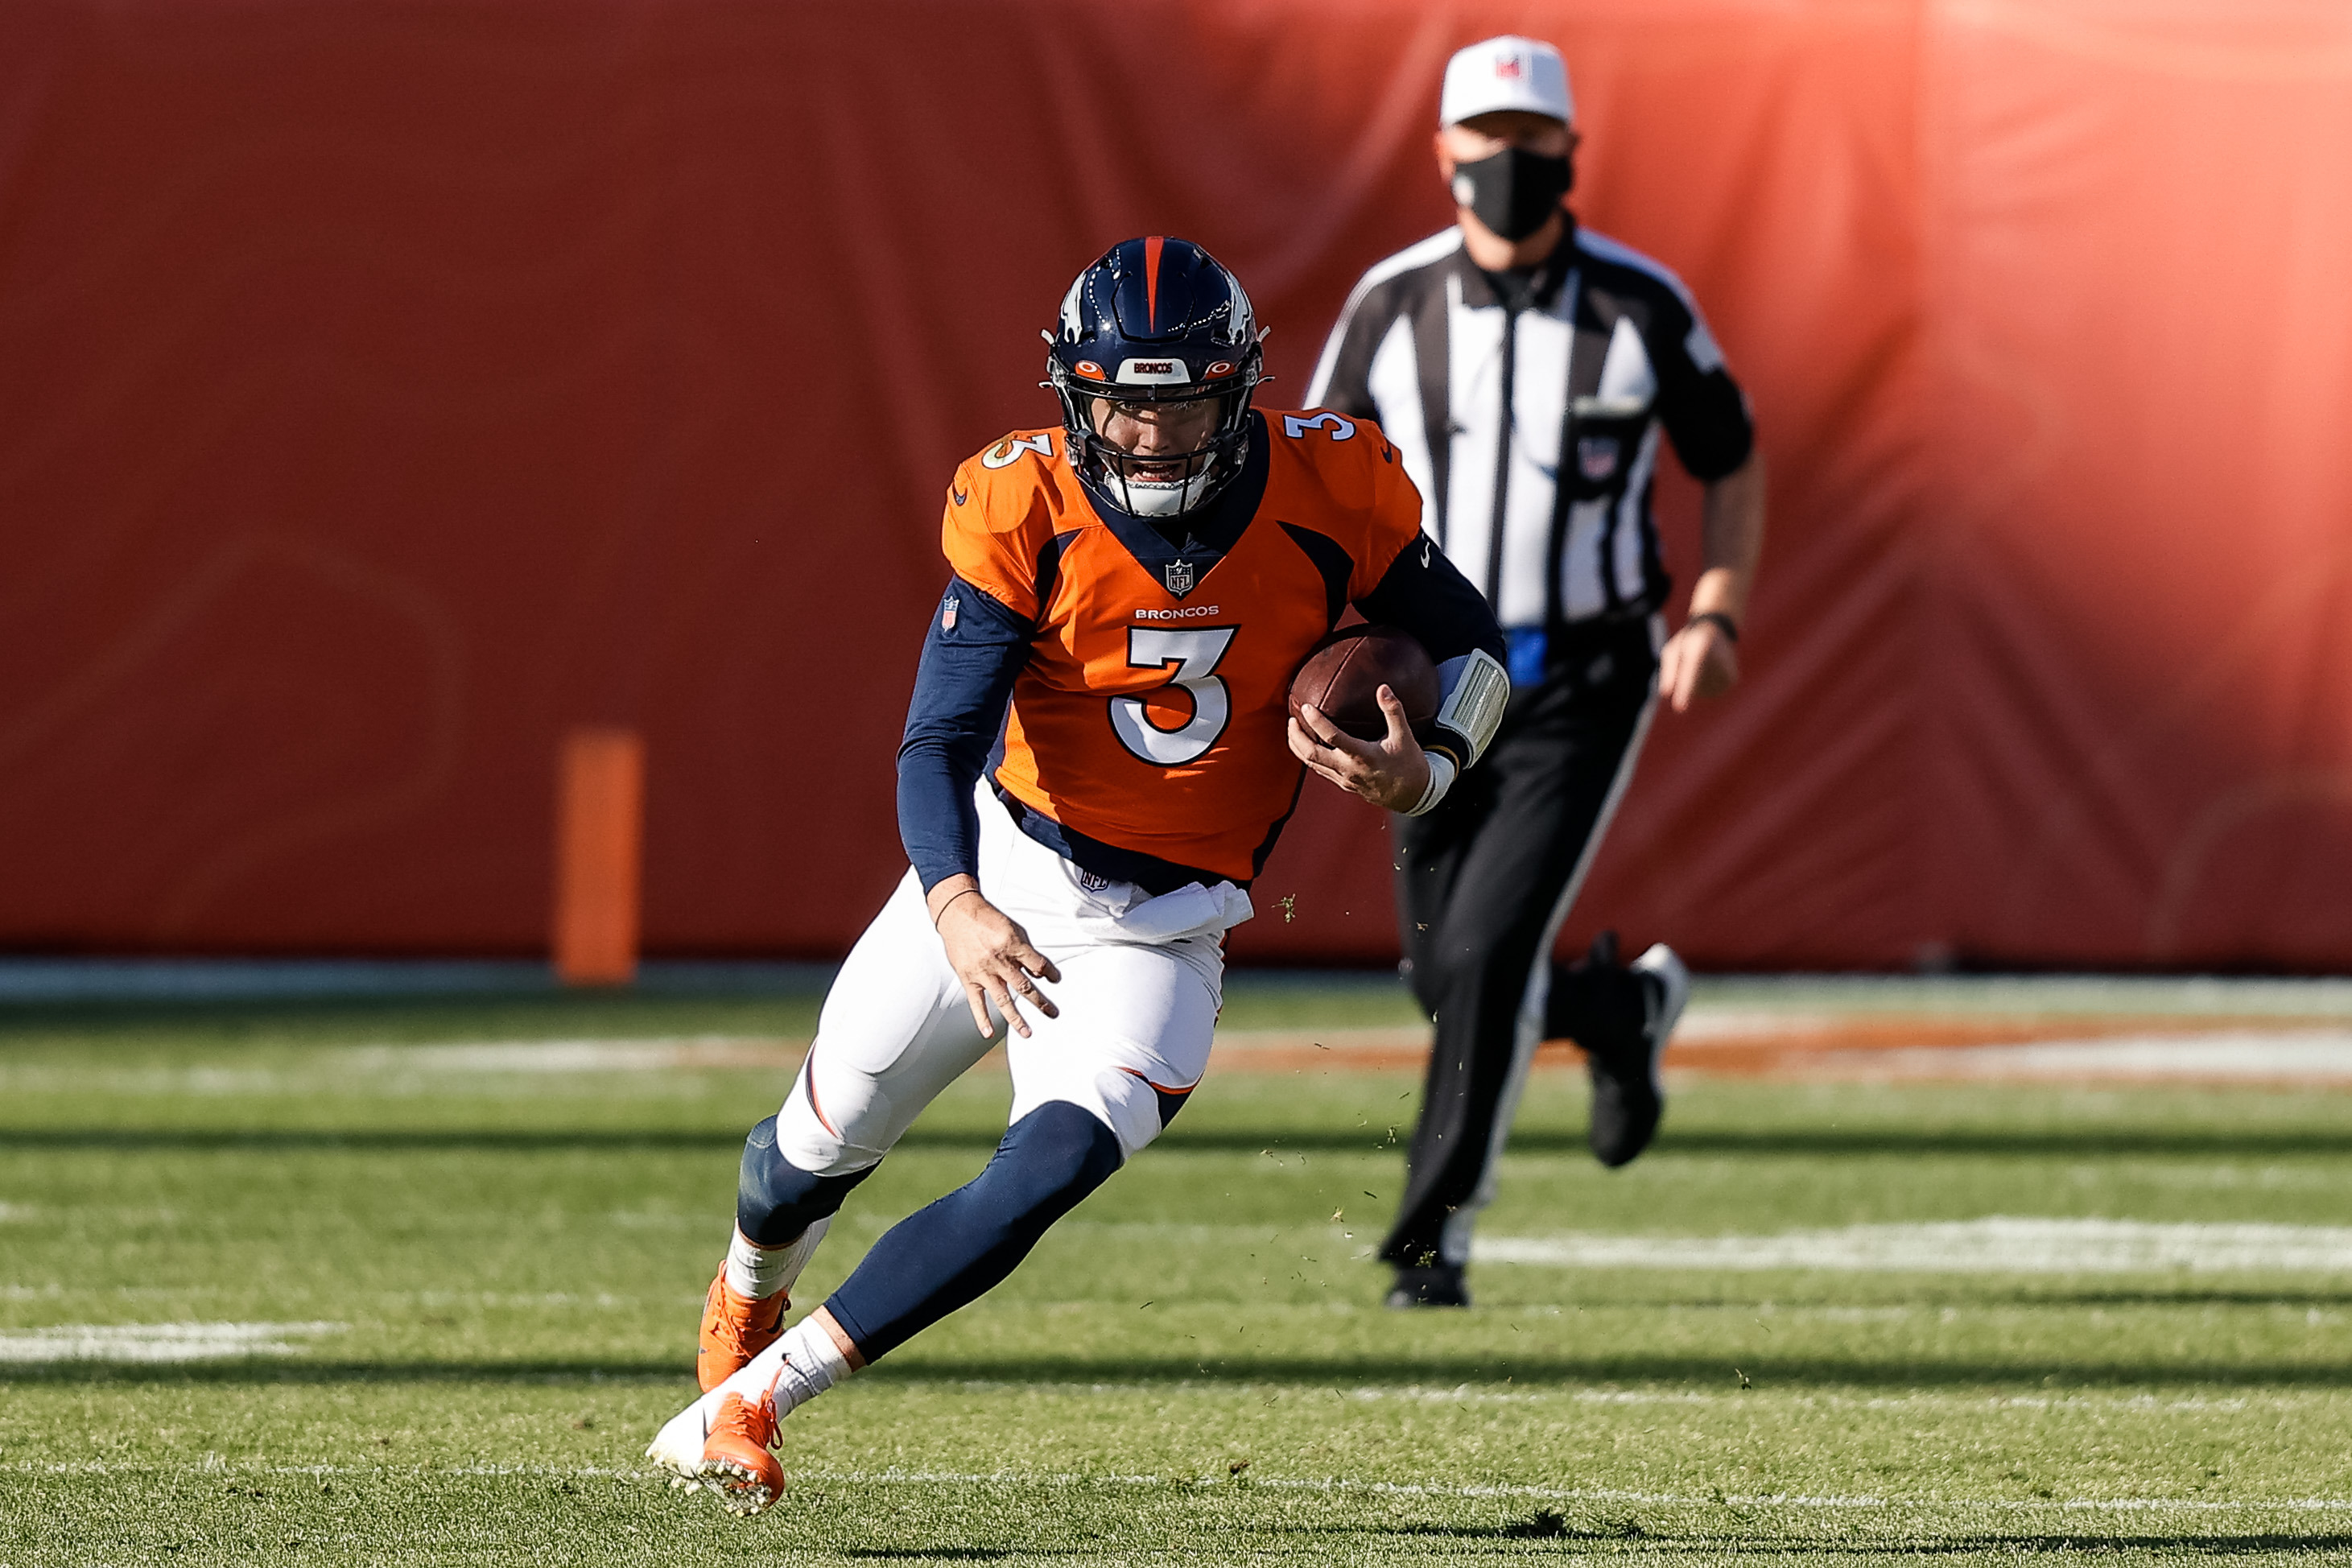 Denver Broncos quarterback Drew Lock (3) runs the ball in the first quarter against the Los Angeles Chargers at Empower Field at Mile High.